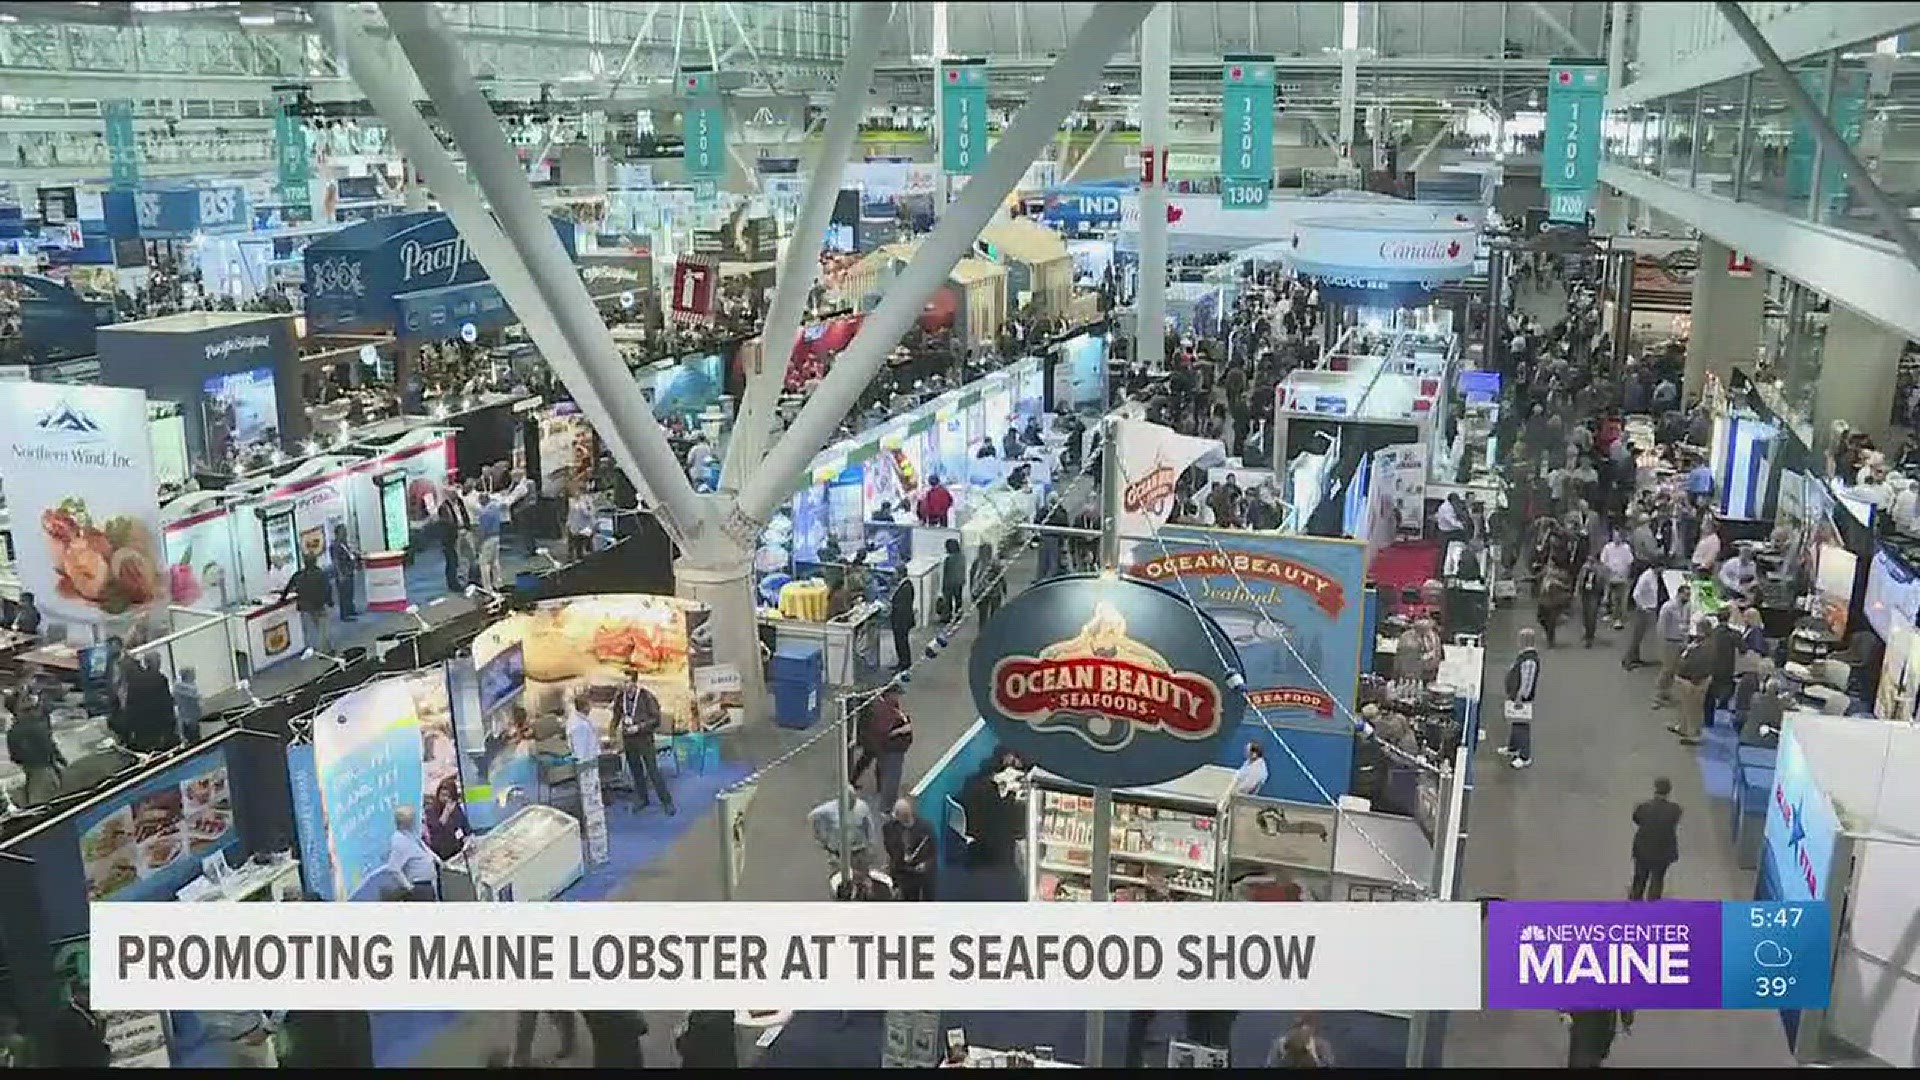 Promoting Maine lobster at the seafood show